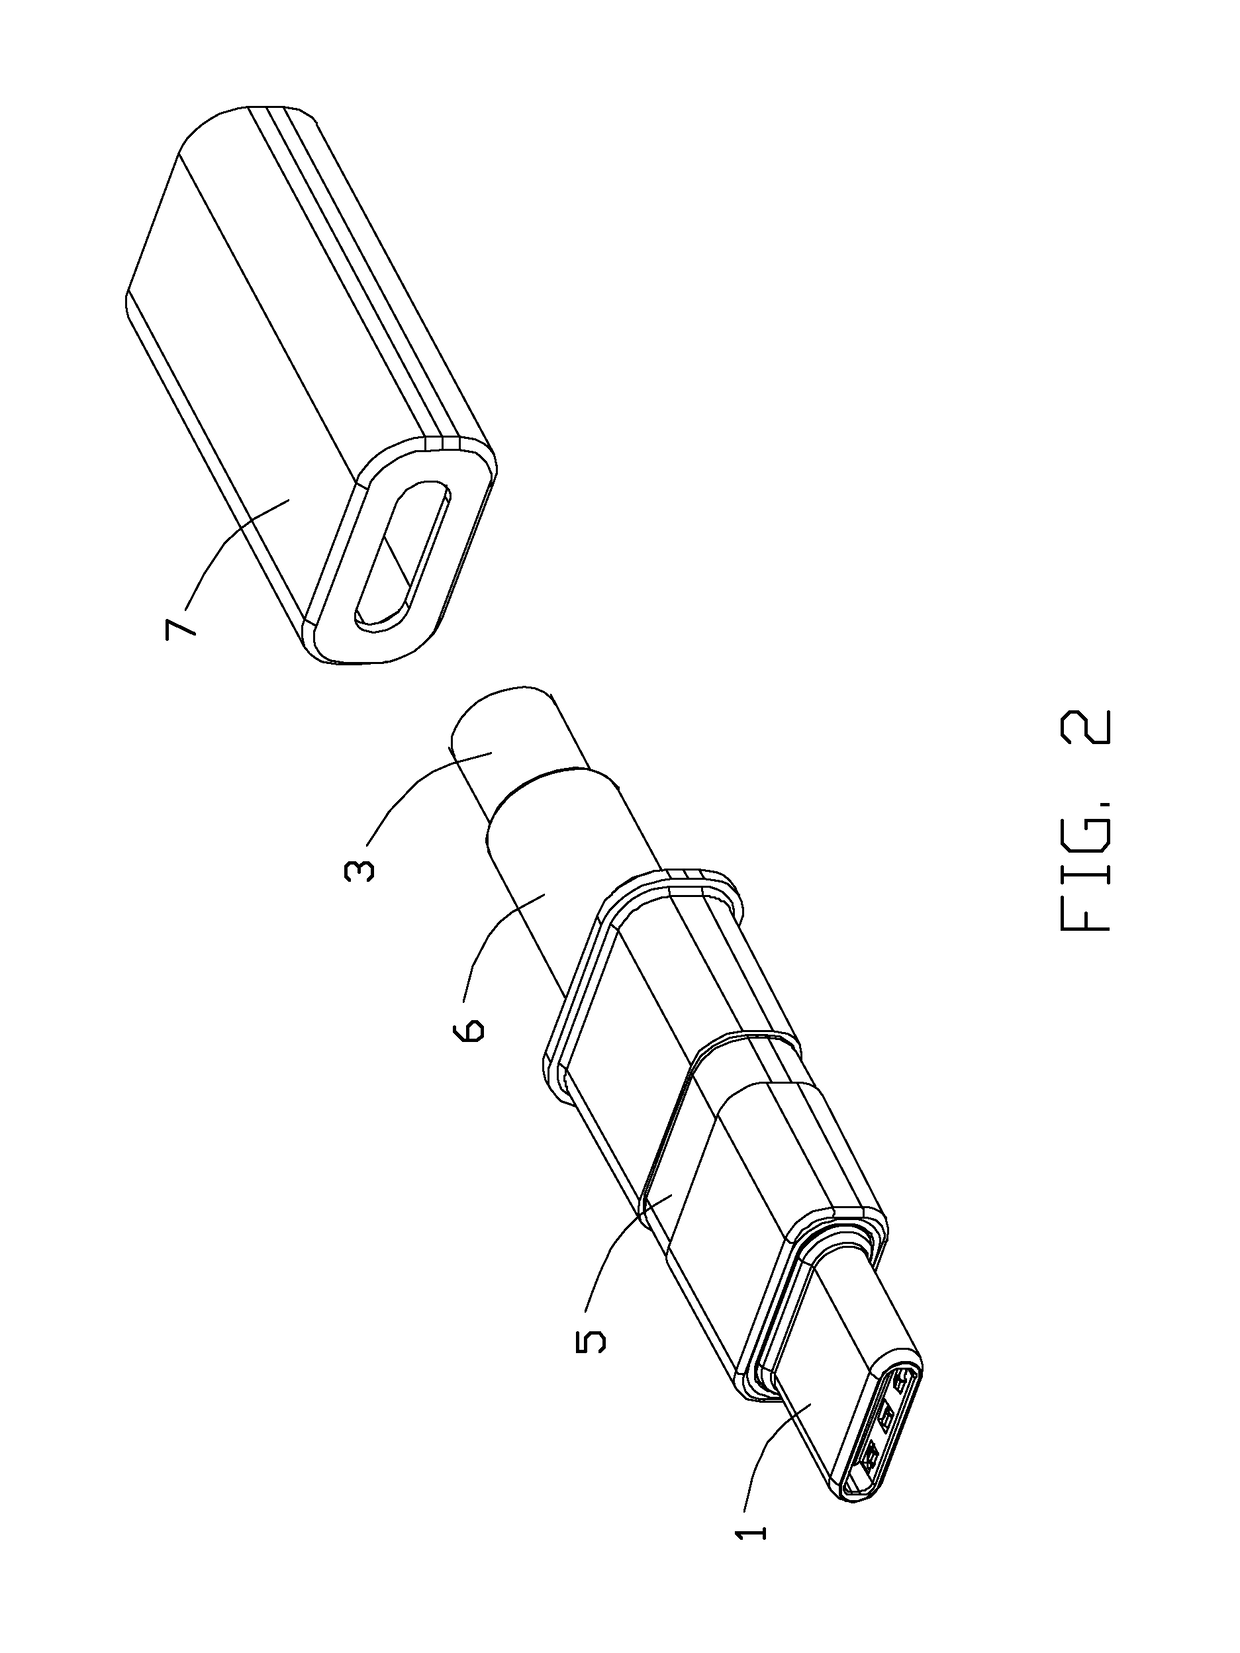 Cable connector assembly with cable wires made of heat-resisting material